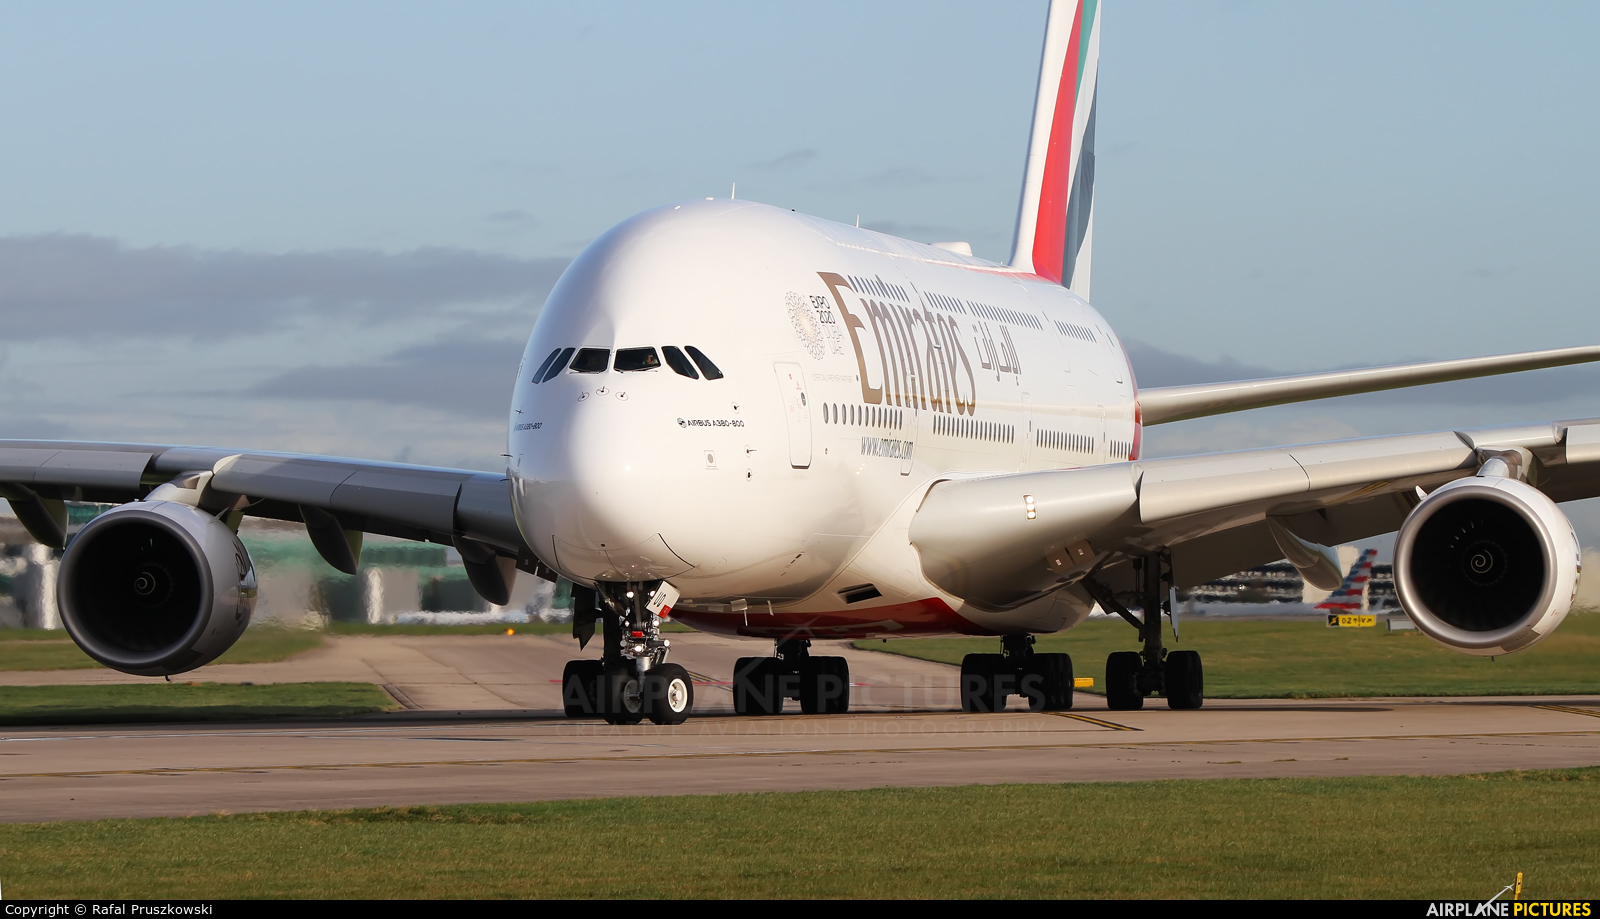 Emirates Airlines A6-EUQ aircraft at Manchester